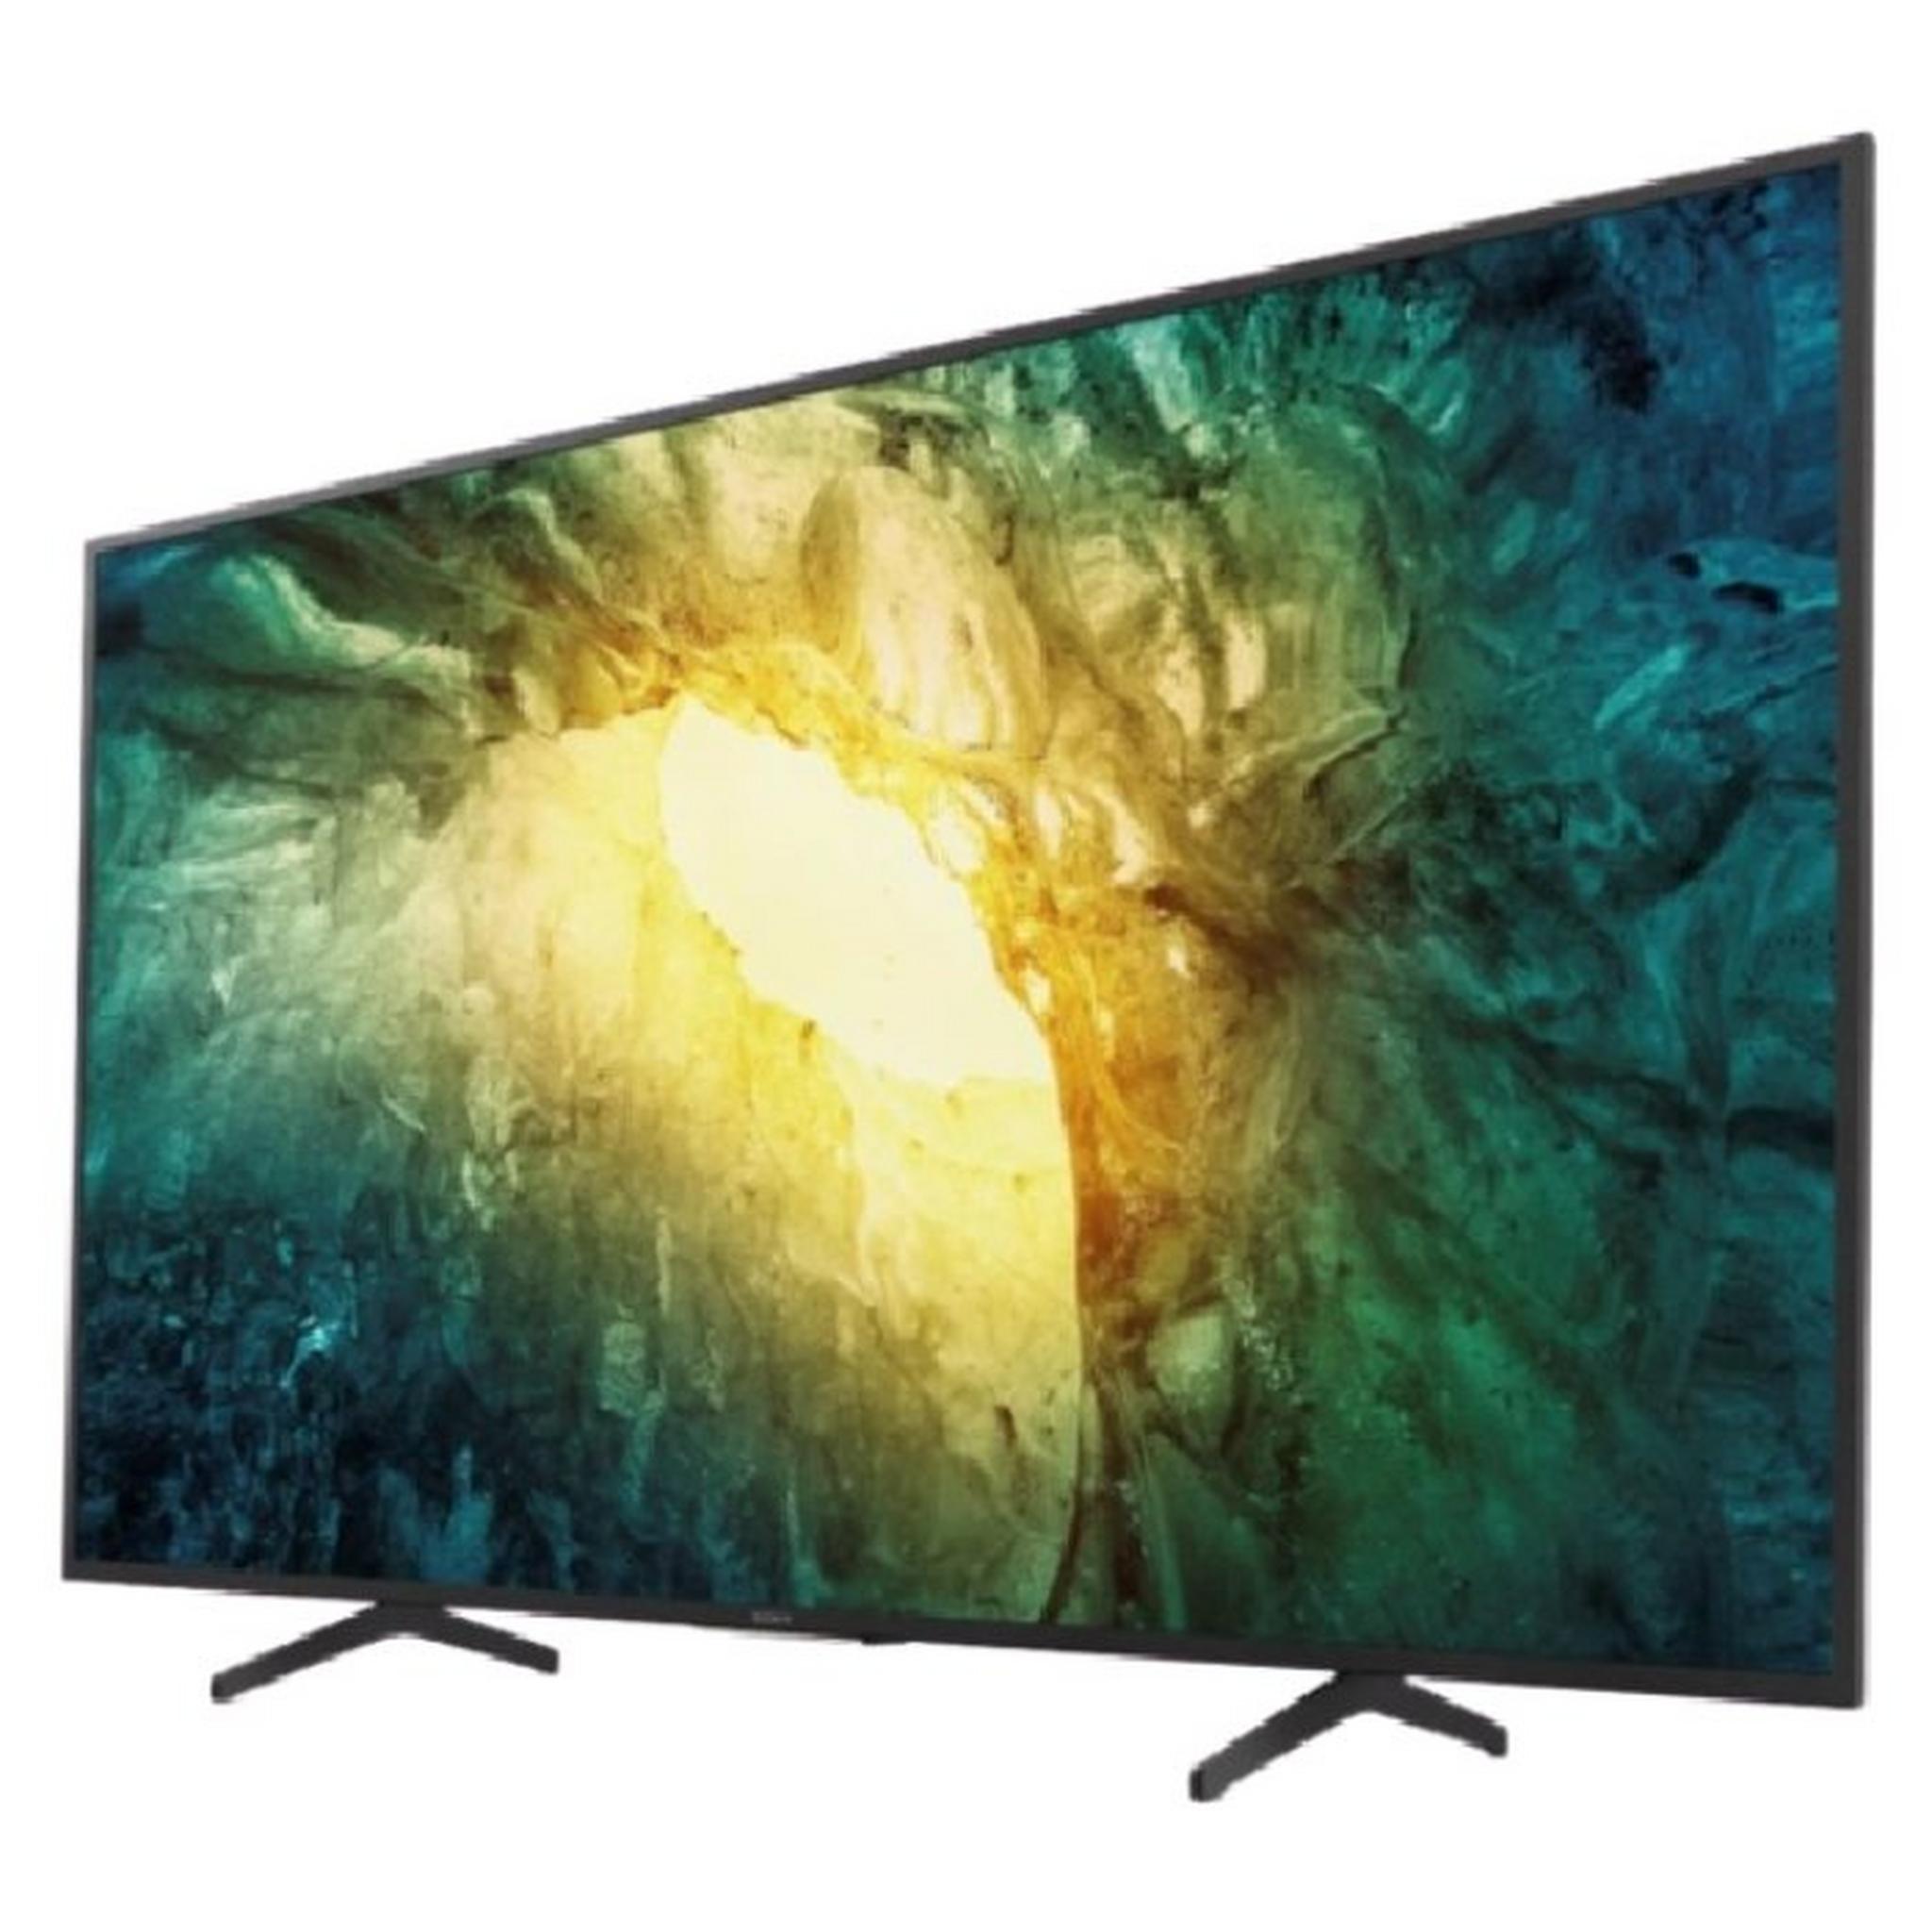 Sony TV 55" Android 4K LED (KD-55X7500H)